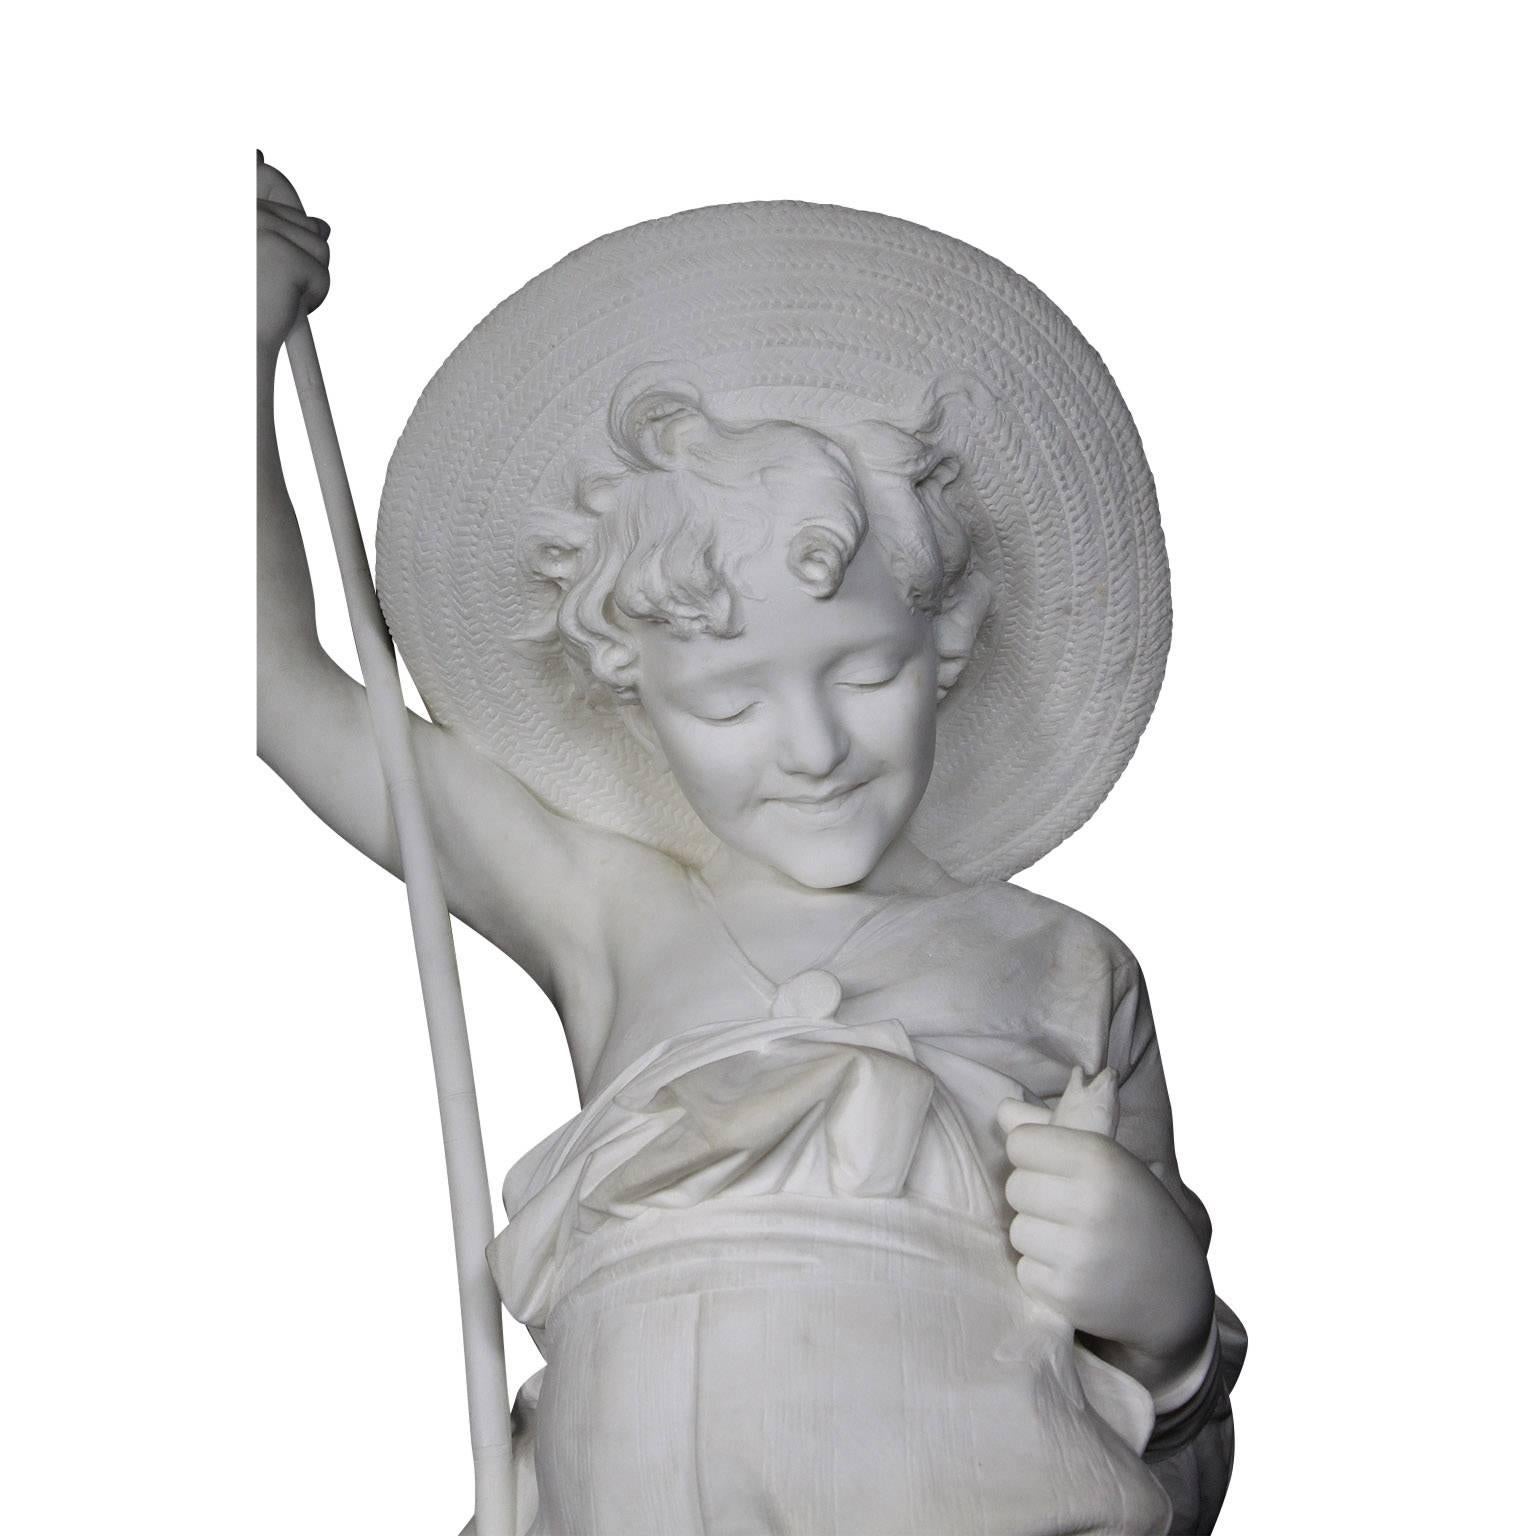 Bohemian Large Italian 19th Century Carved Carrara Marble Figure of a Fisherman Boy For Sale